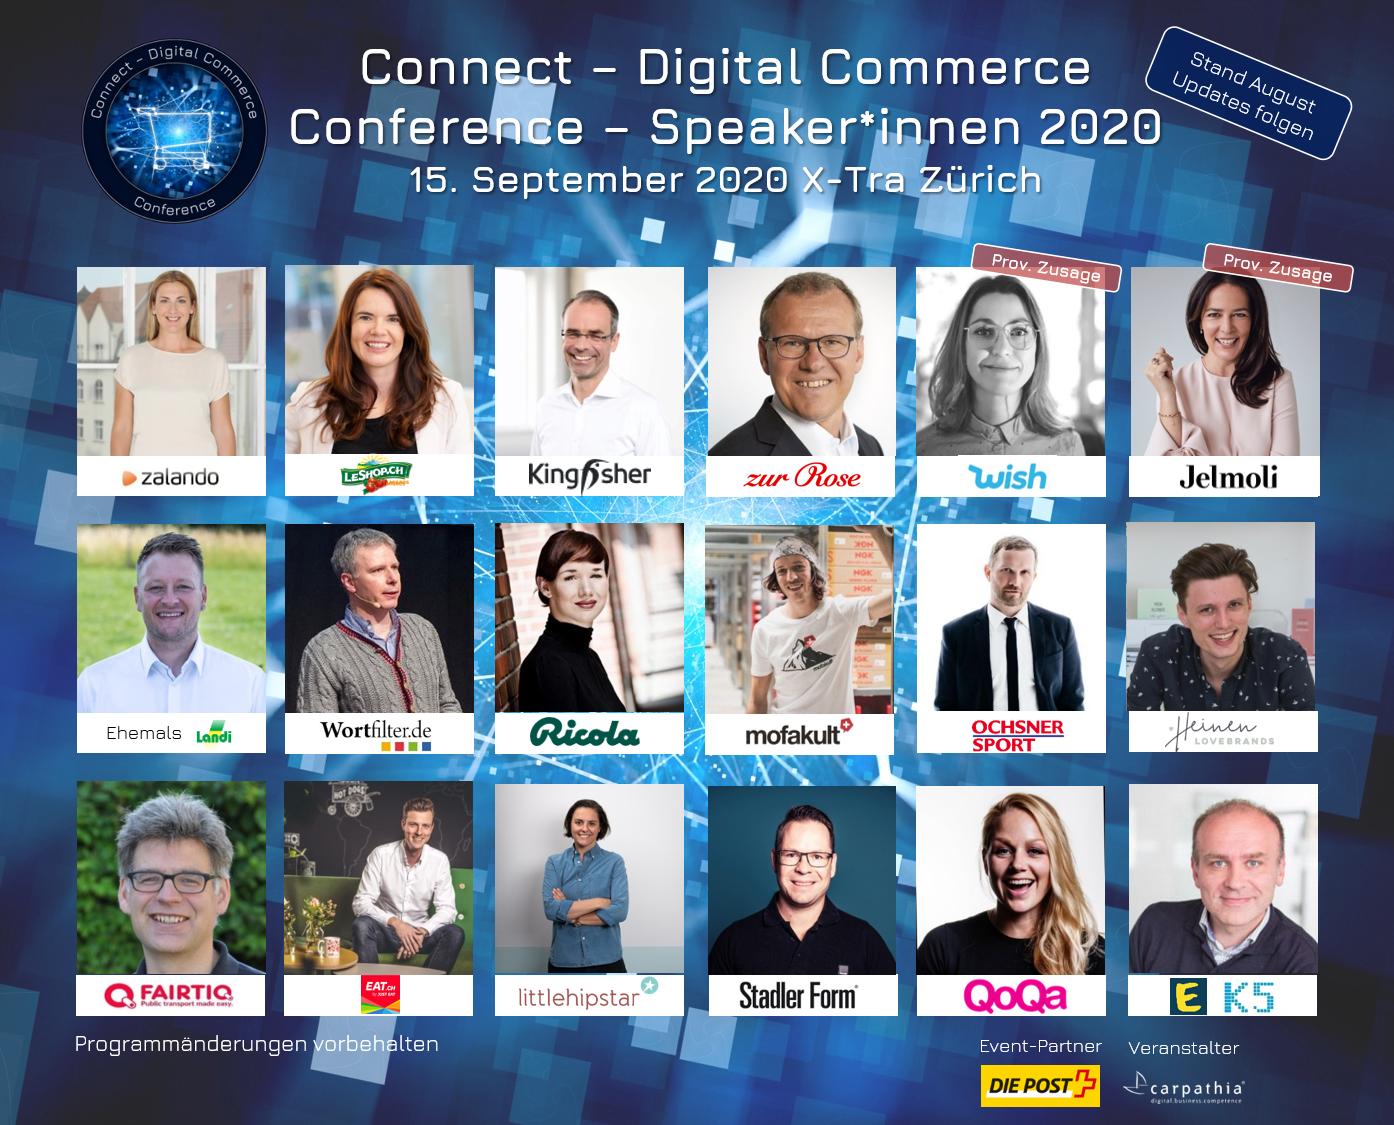 Speaker*innen Lineup - Connect - Digital Commerce Conference 2020